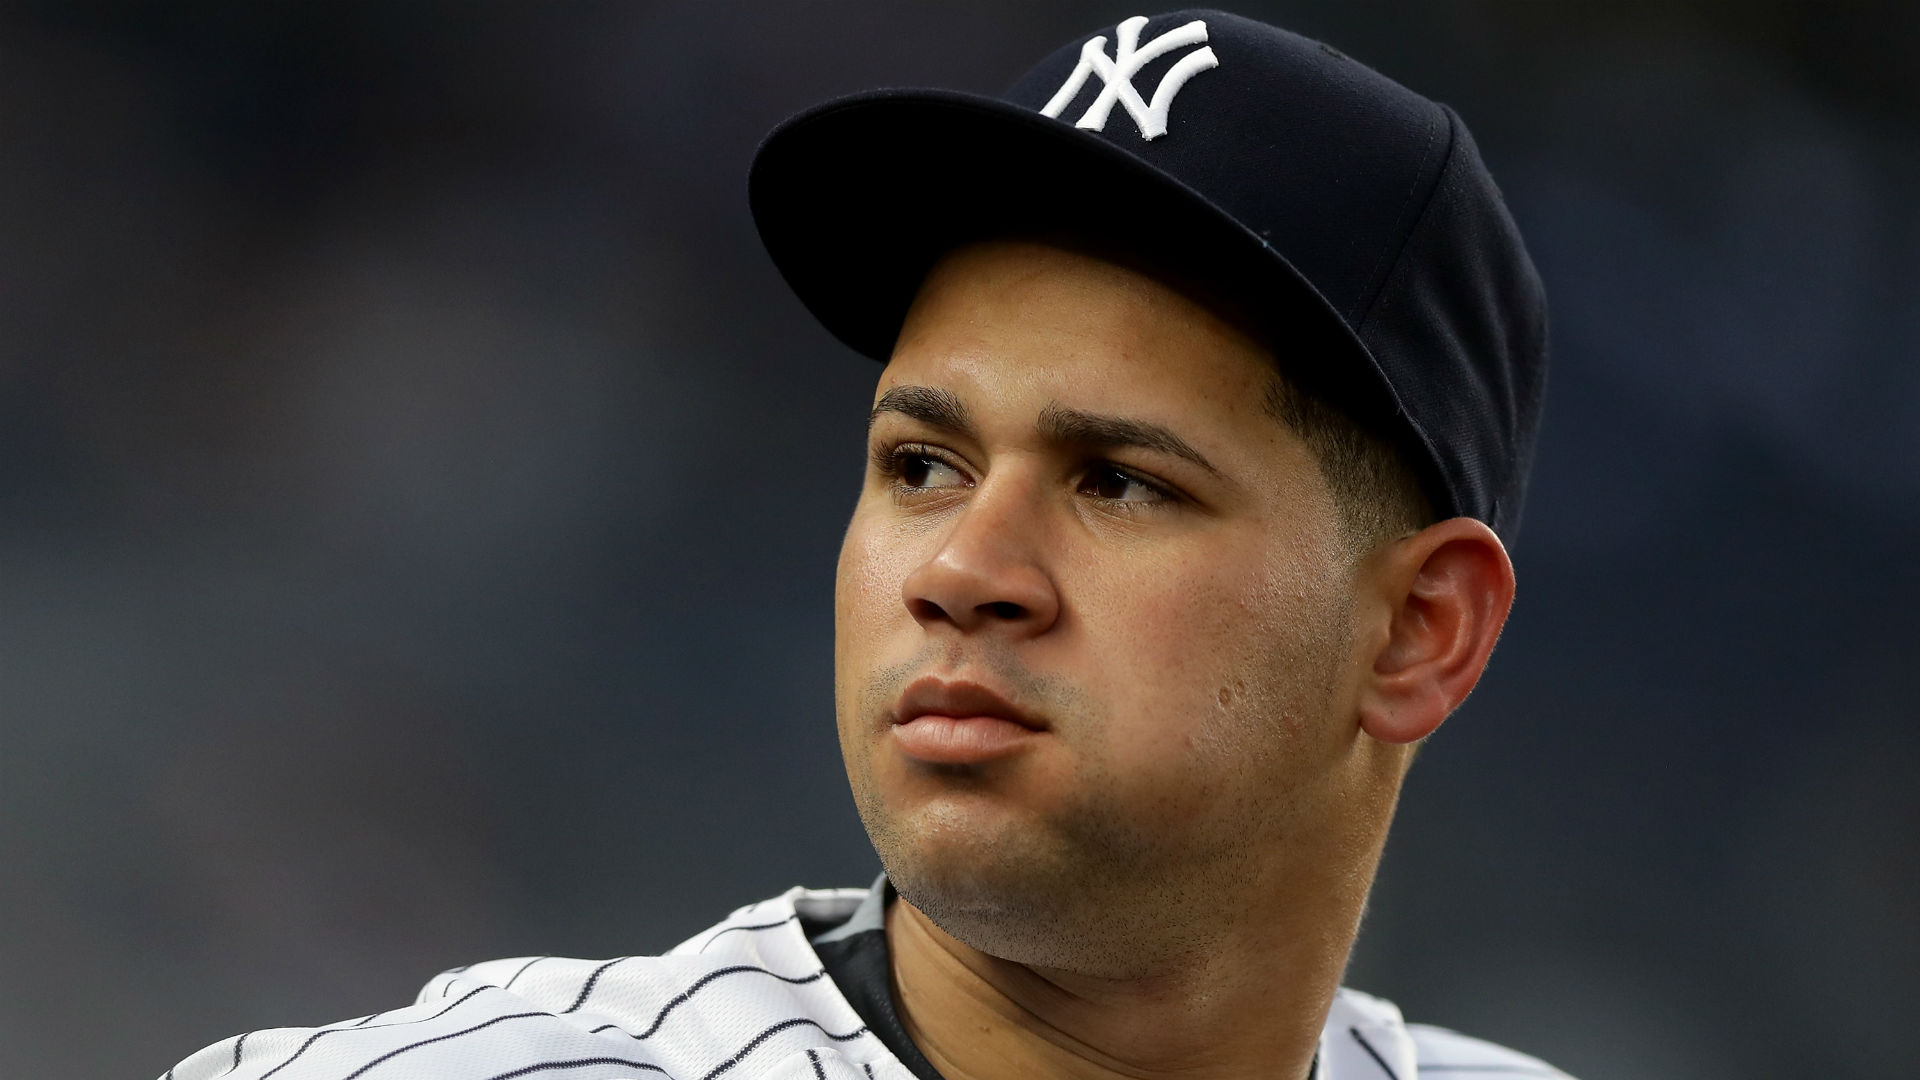 If all goes well in a rehab game on Monday, catcher Gary Sanchez will be back in the lineup next week for the first time since April 10.